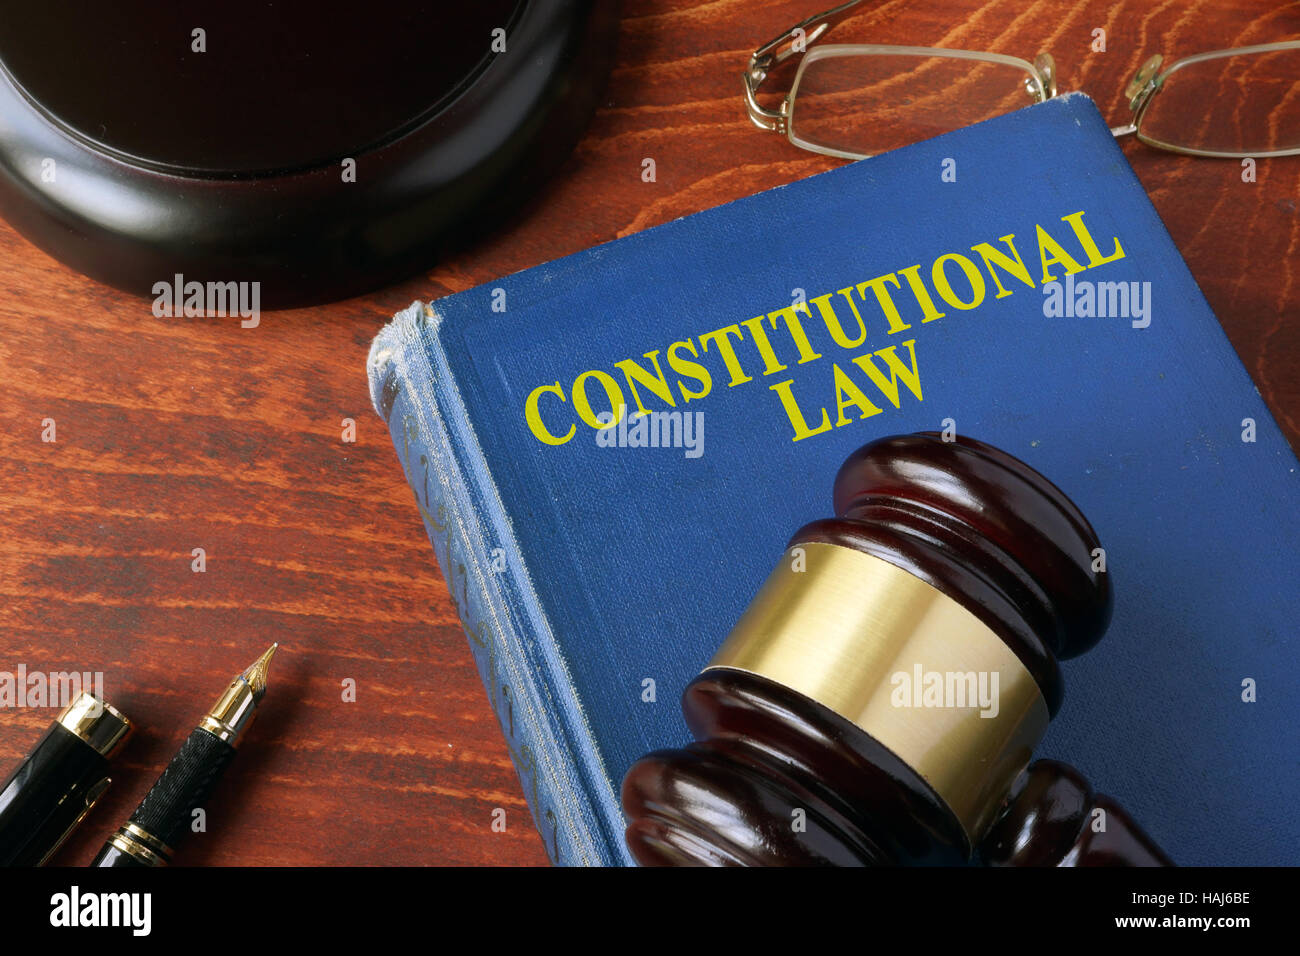 Title constitutional law on a book and a gavel. Stock Photo